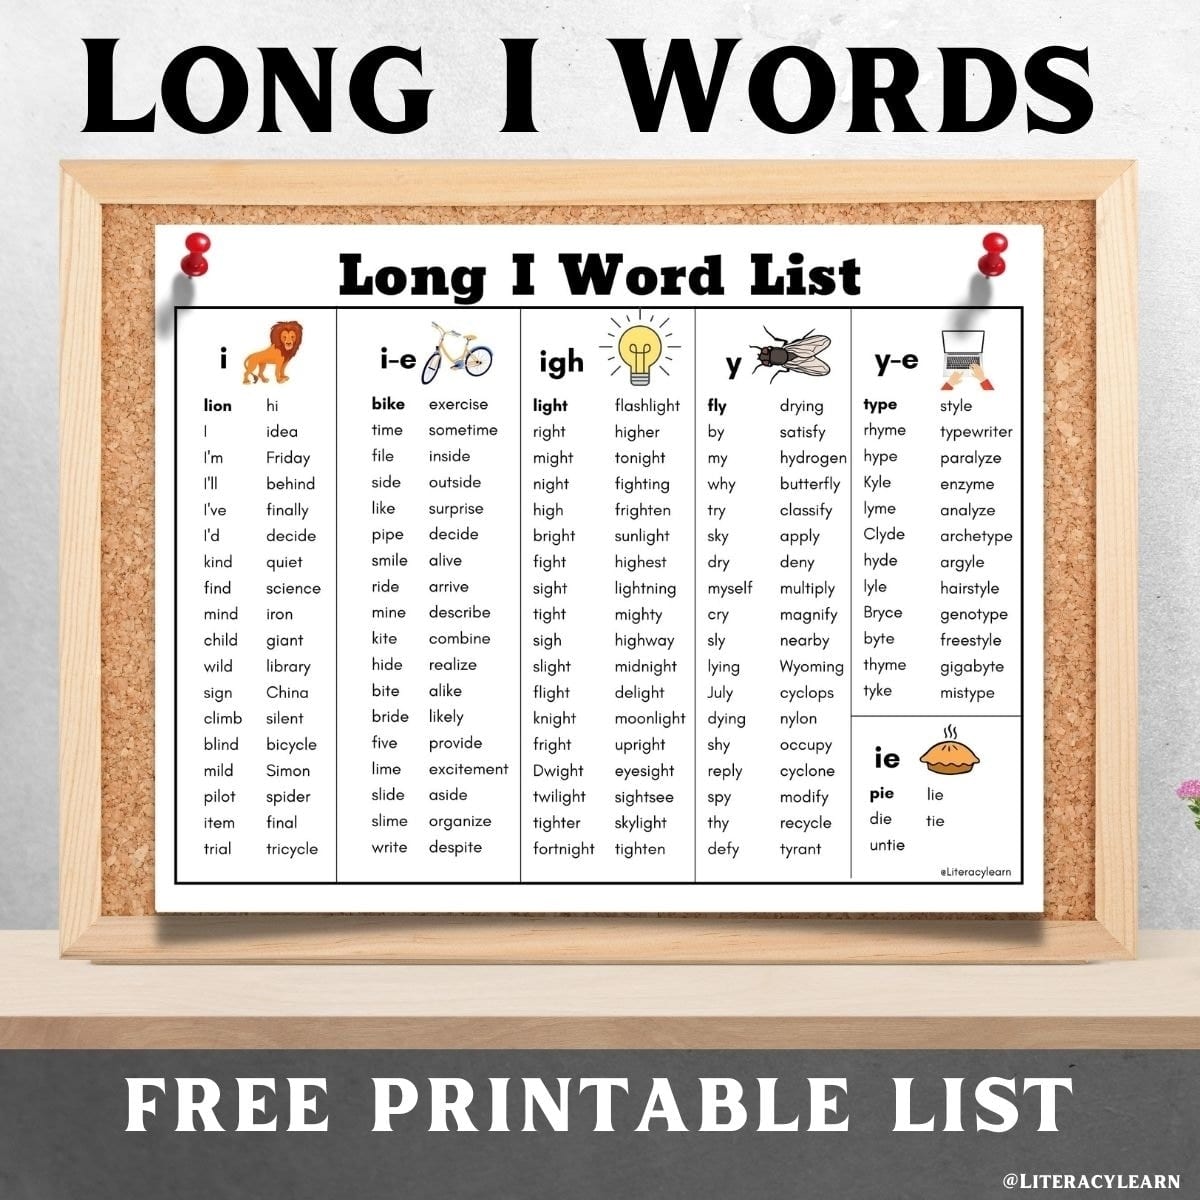 173+ Long i Vowel Sound Words (Free Printable List) - Literacy Learn